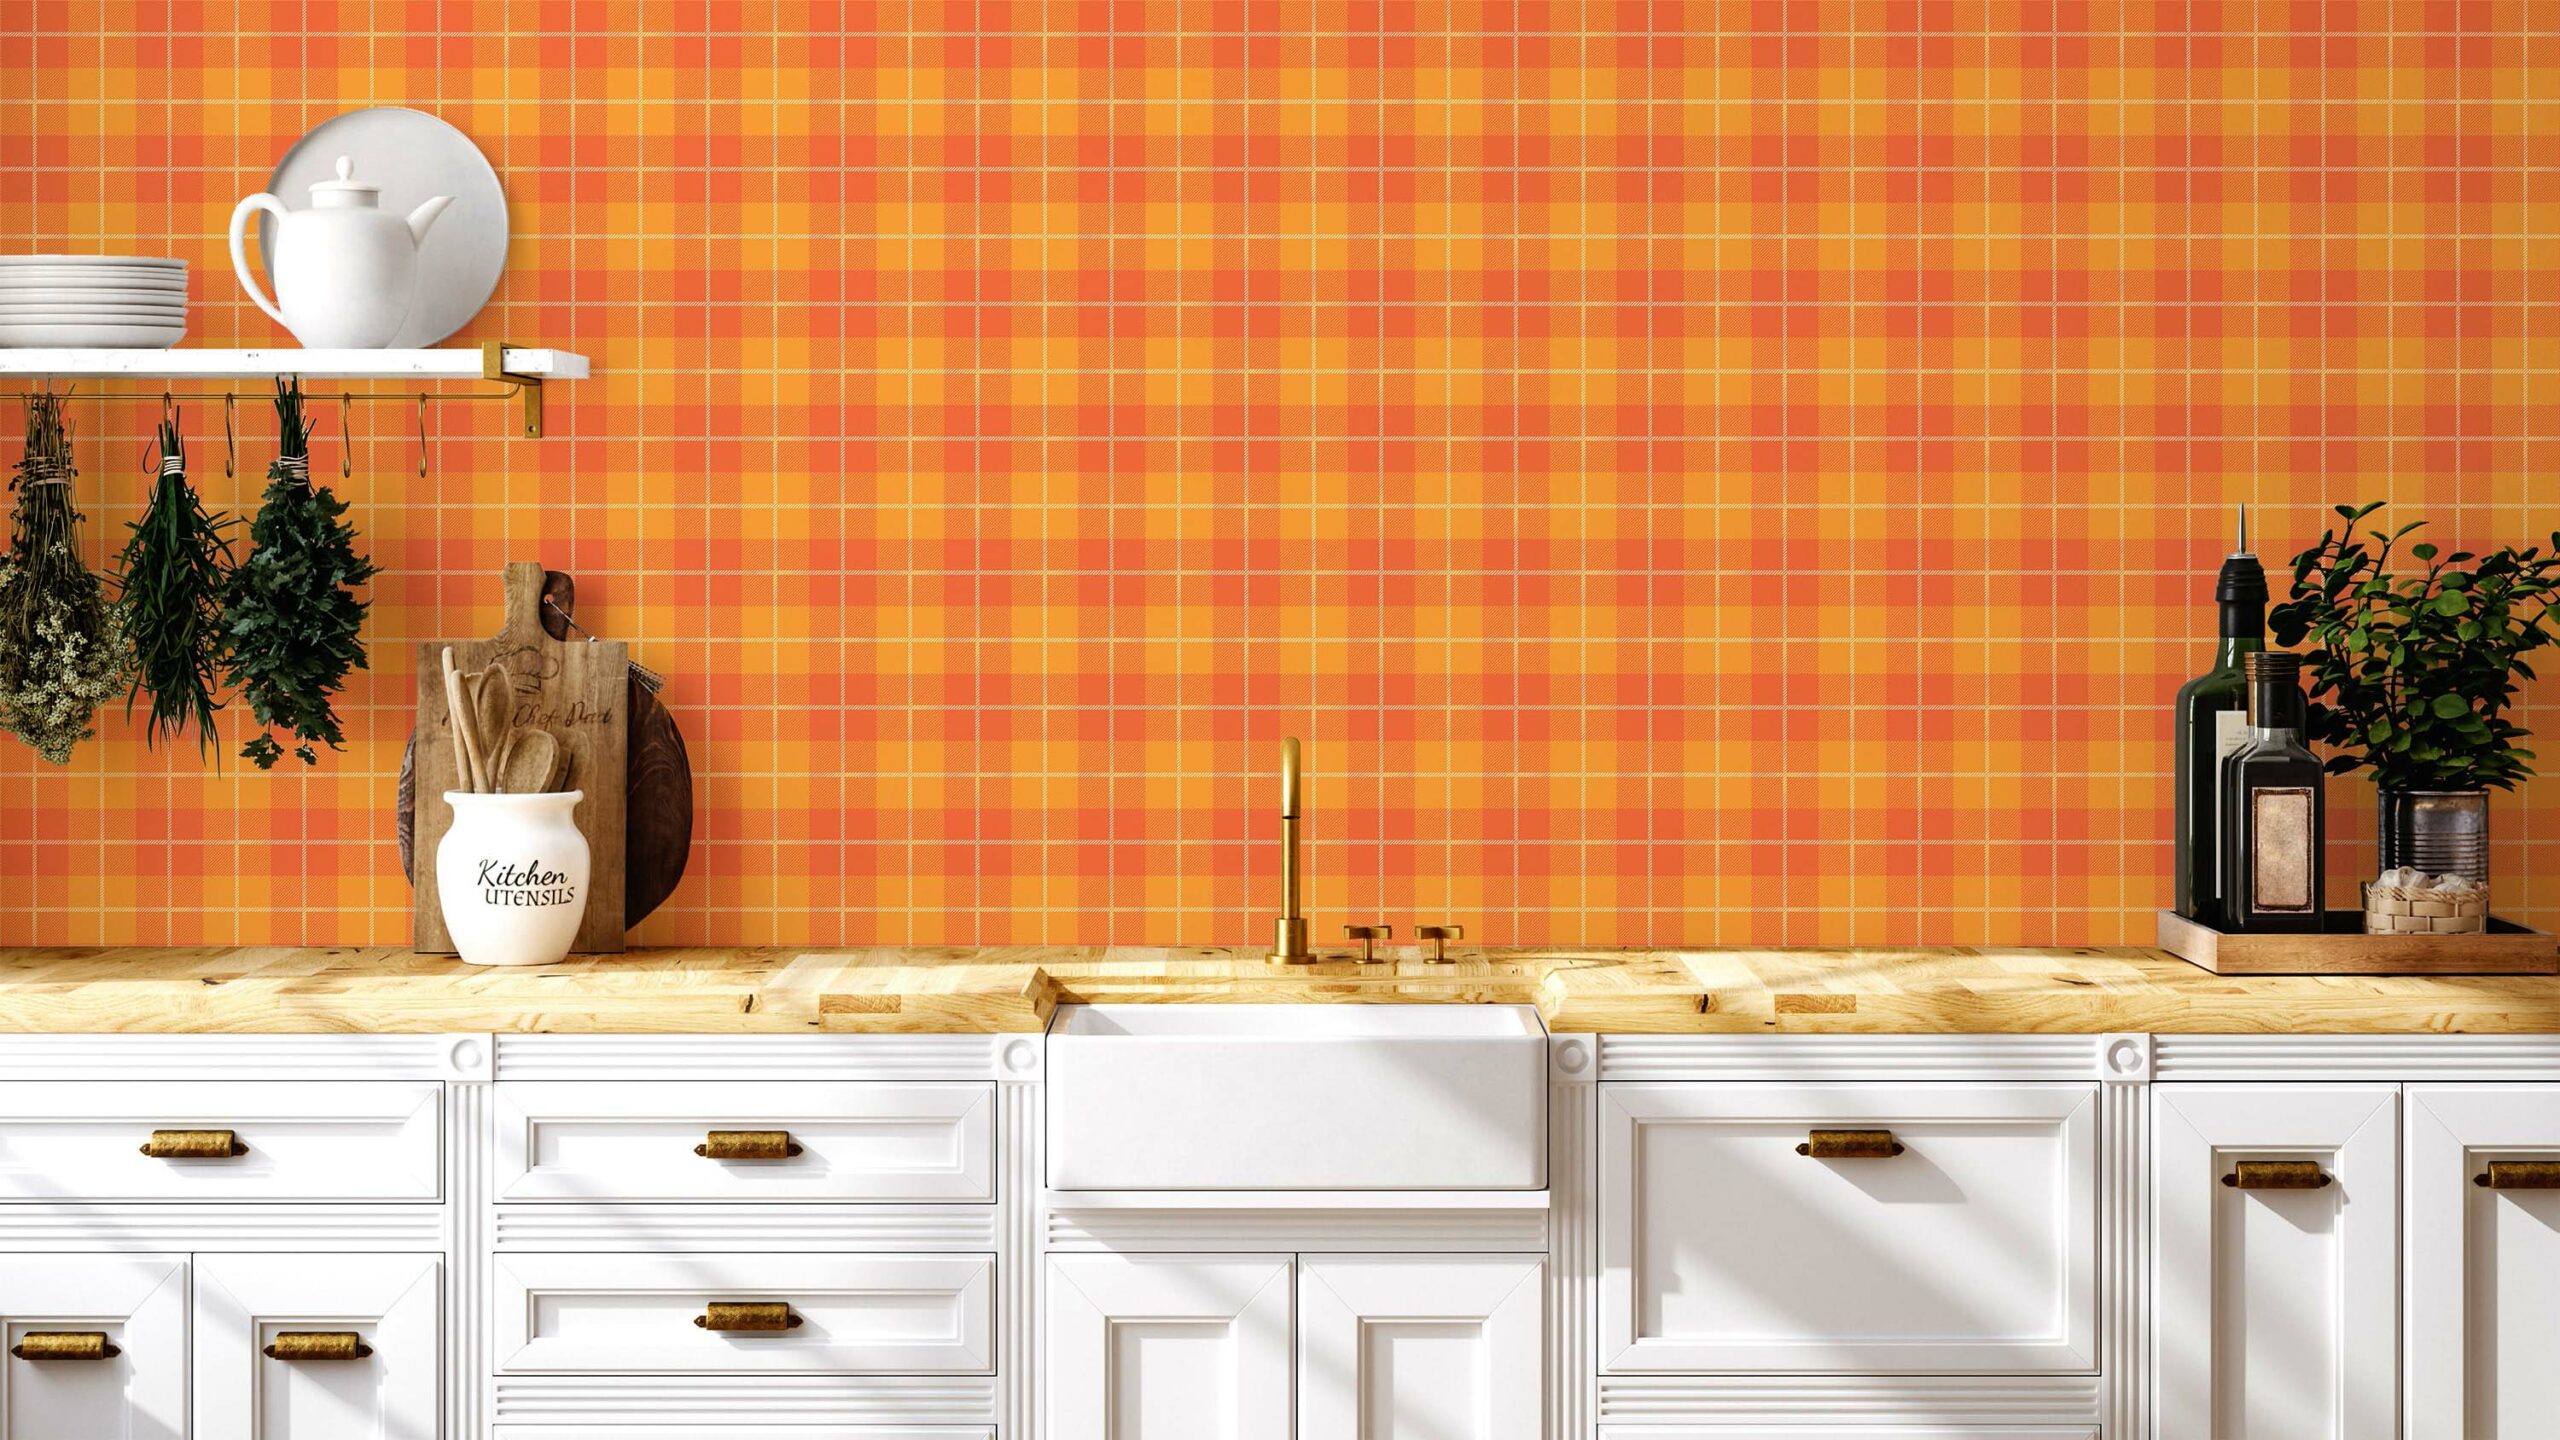 plaid orange and yellow traditional wallpaper